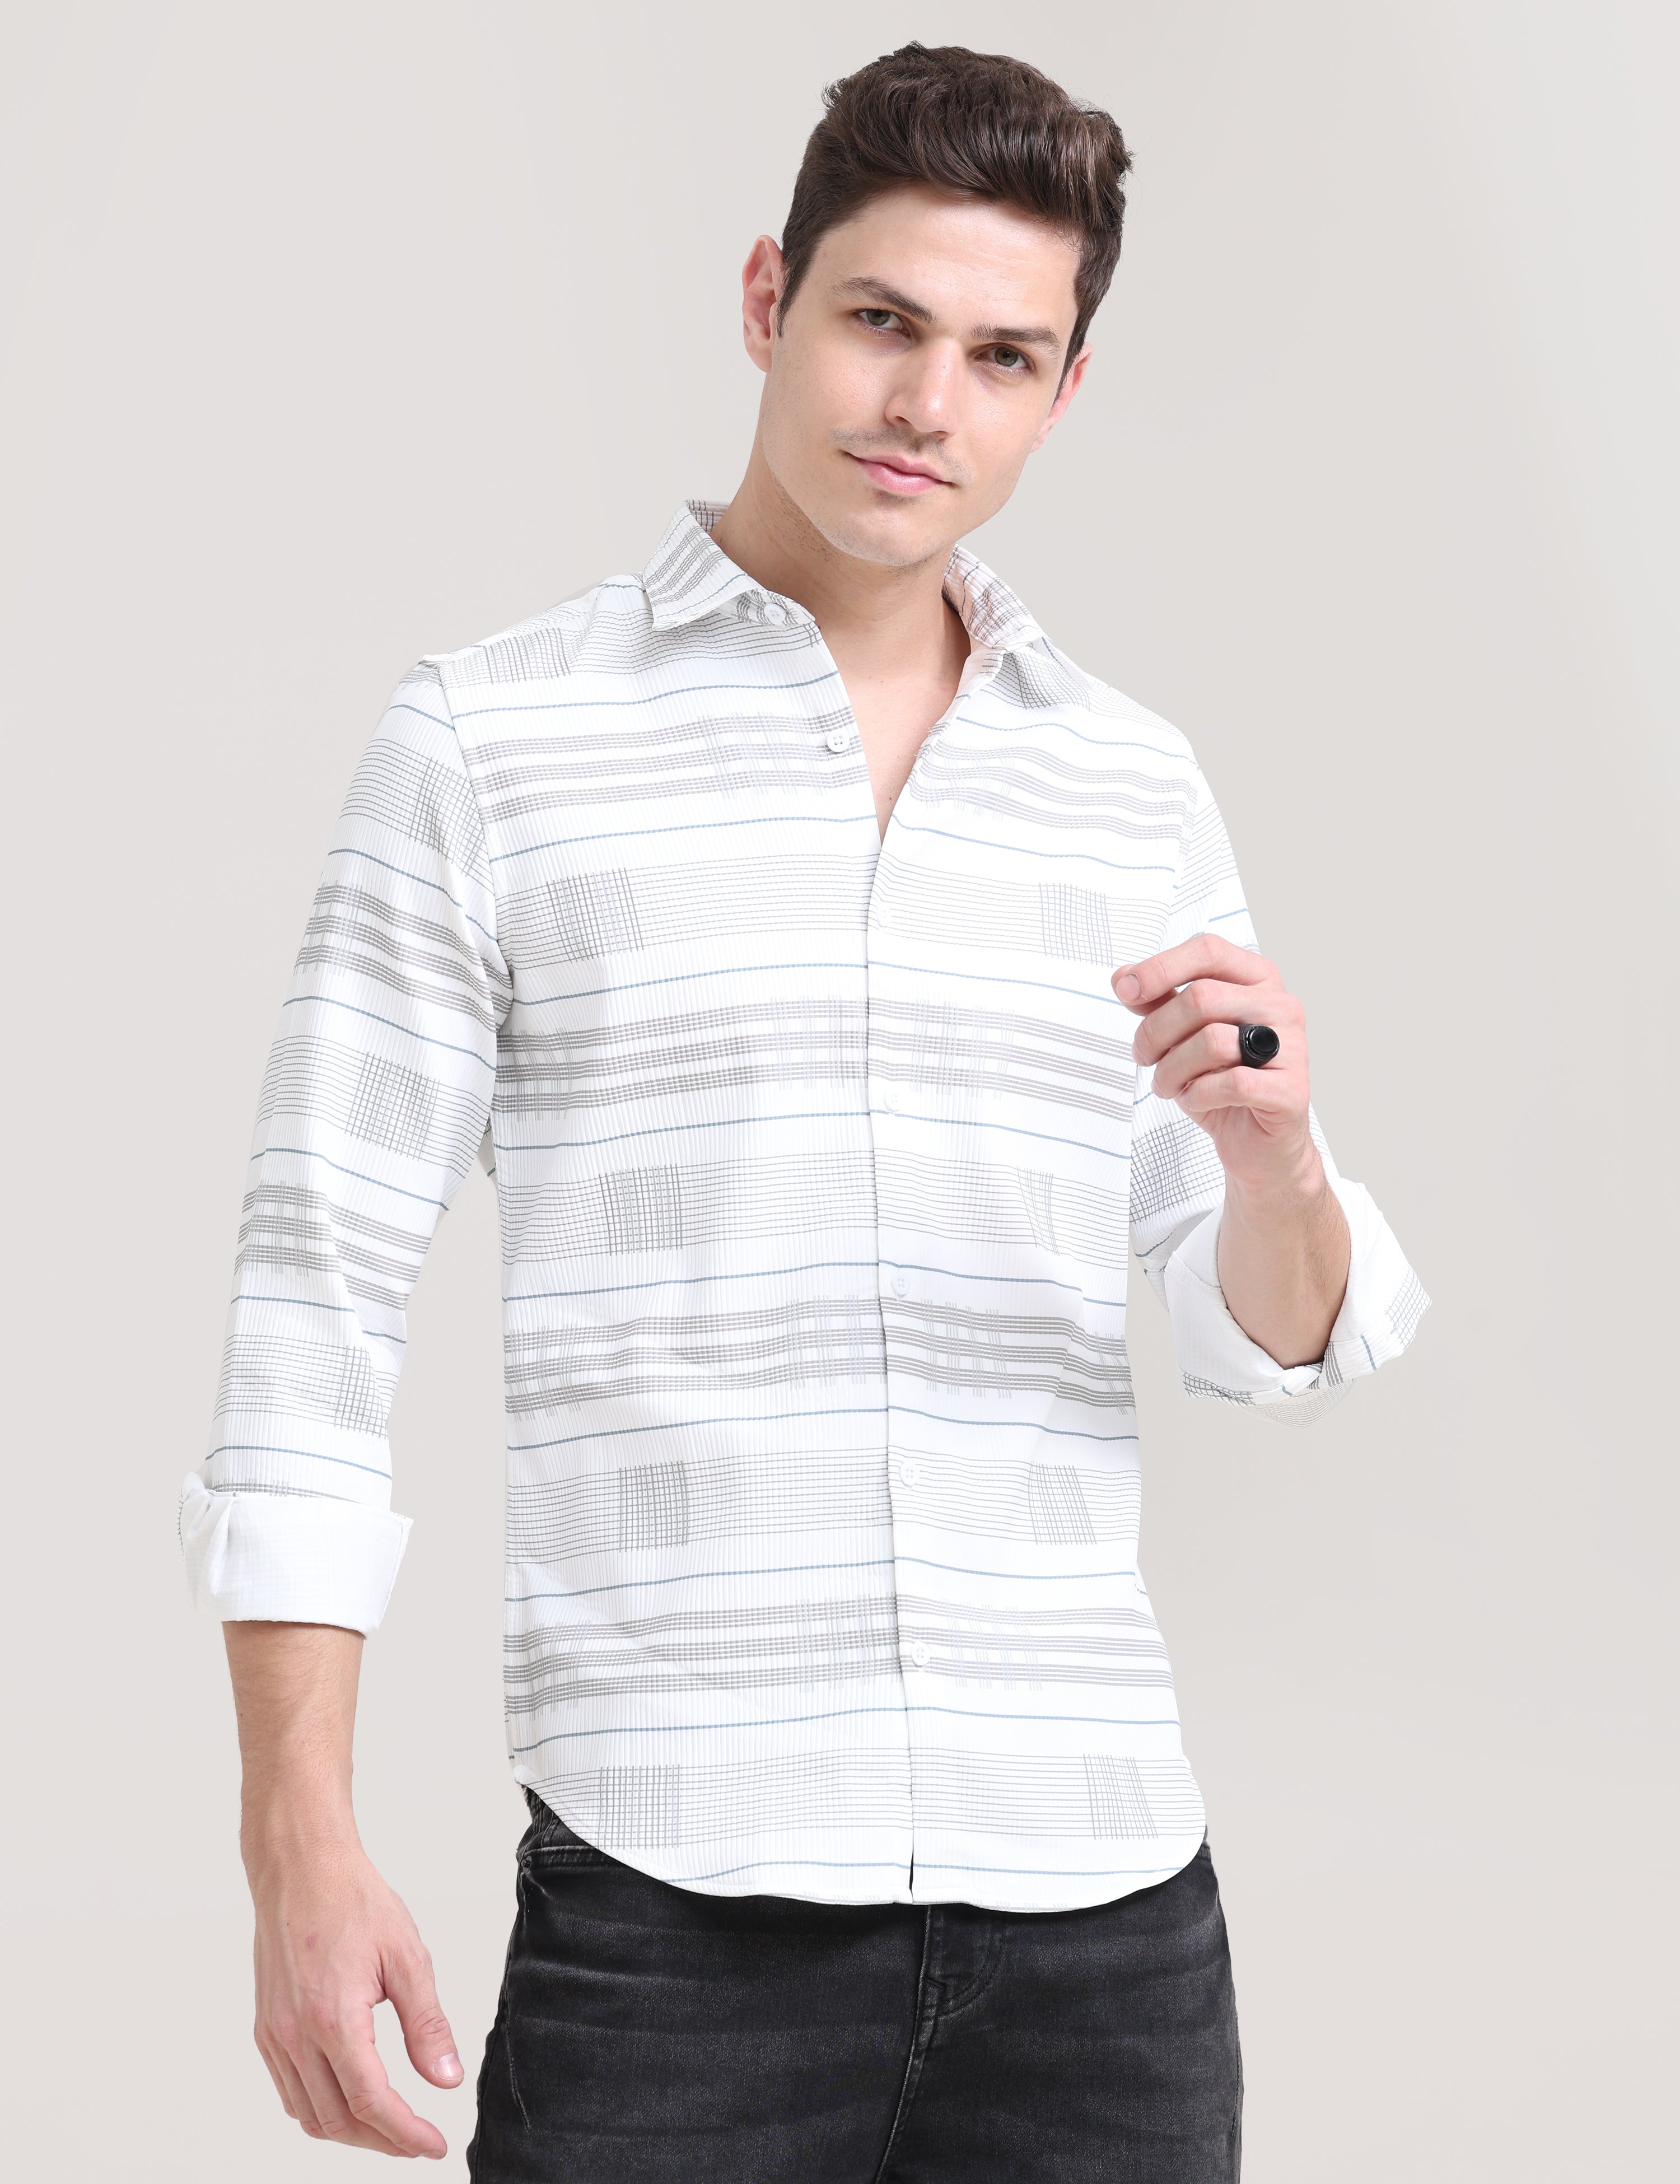 Sandstorm Style: Printed Beige Tapered Fit Shirt